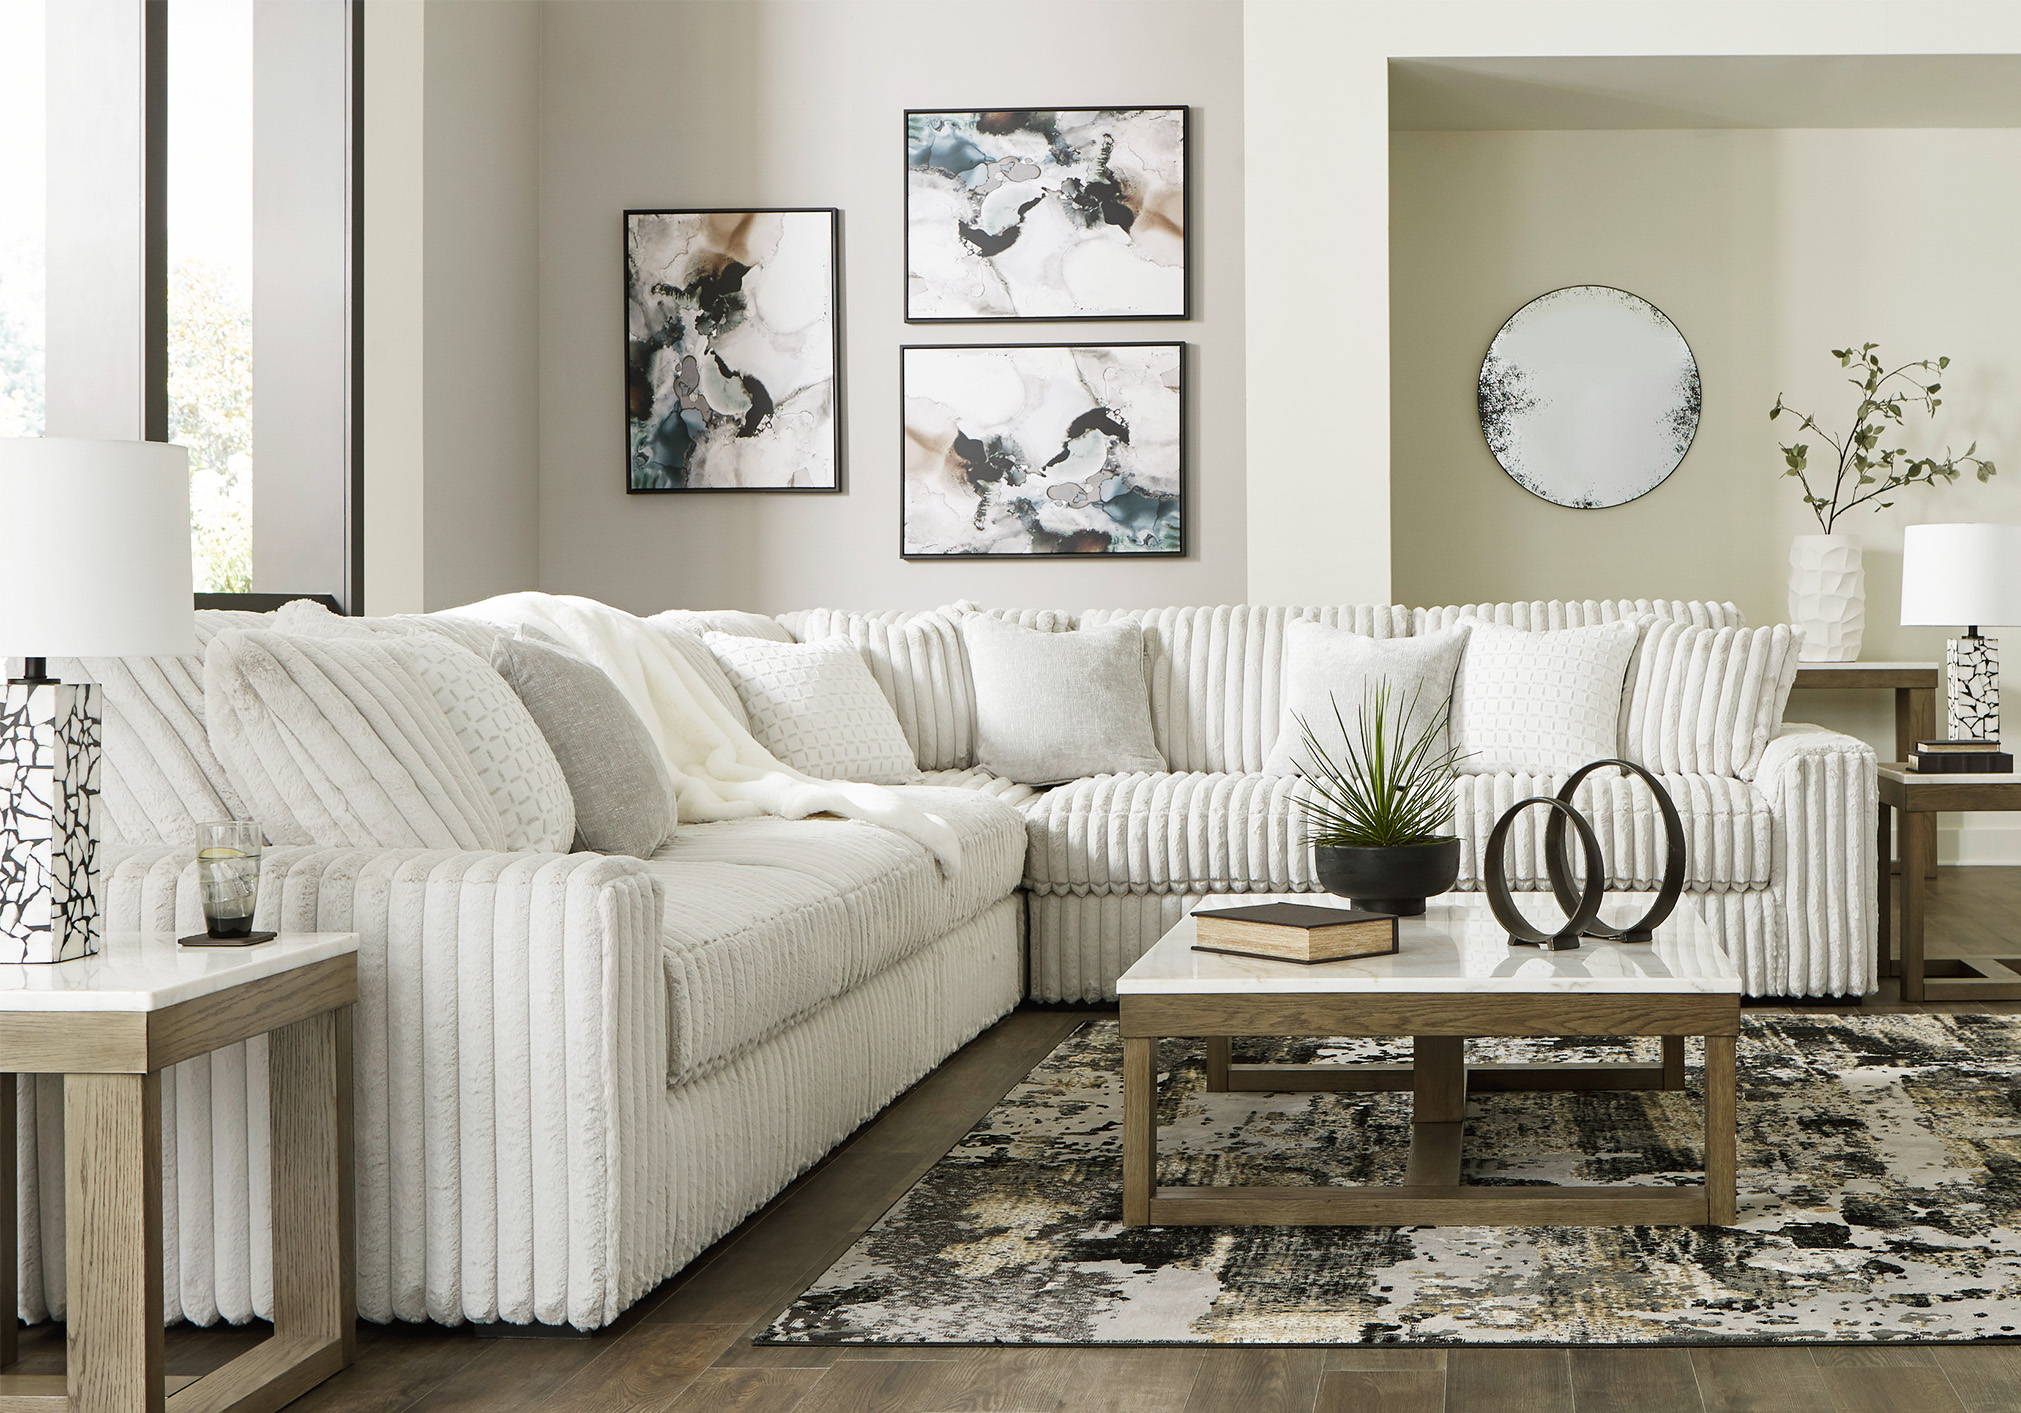 Living room collection, 3 piece white sectional with ottoman in the image, Shop living room button sends you to the in-stock living room collection